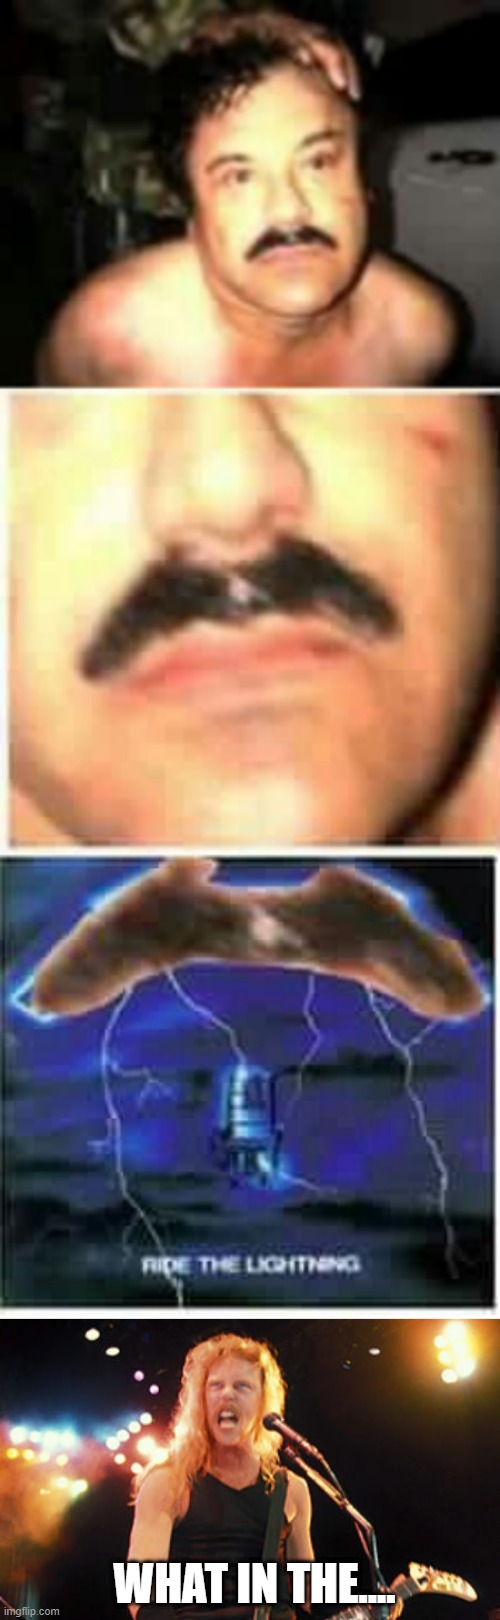 RIDE THE MUSTACHE | WHAT IN THE.... | image tagged in mustache,metallica,metal,thrash metal | made w/ Imgflip meme maker